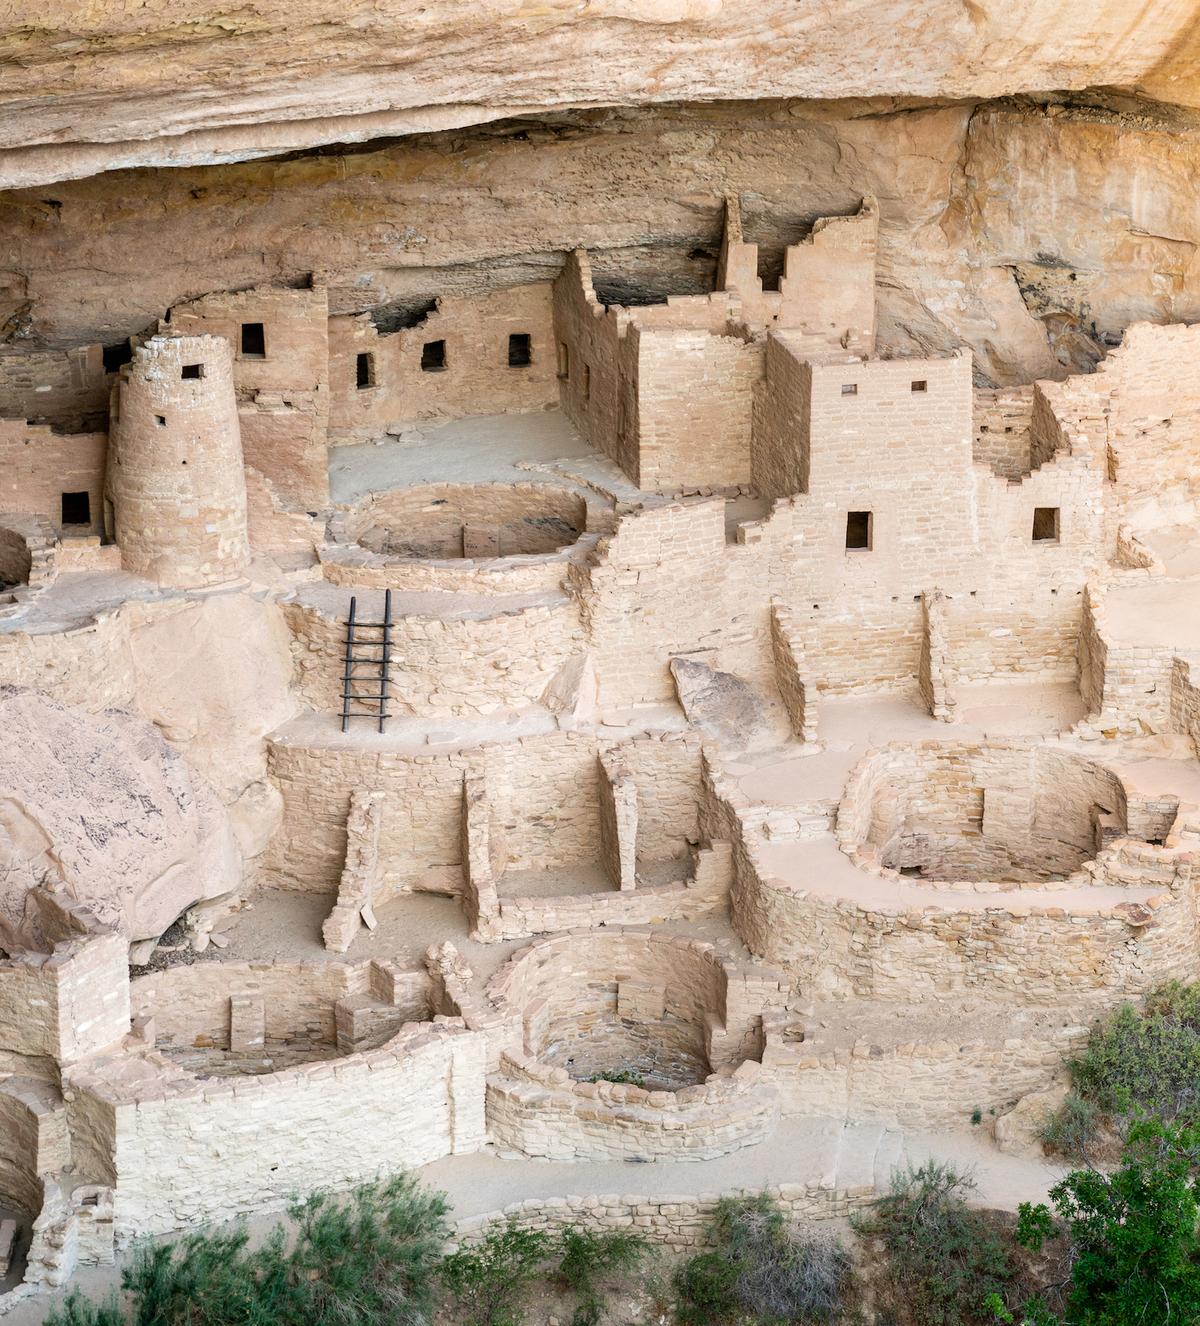 The damaged structures of Cliff Palace reveal quarters above and below ground. (NatalieJean/Shutterstock)